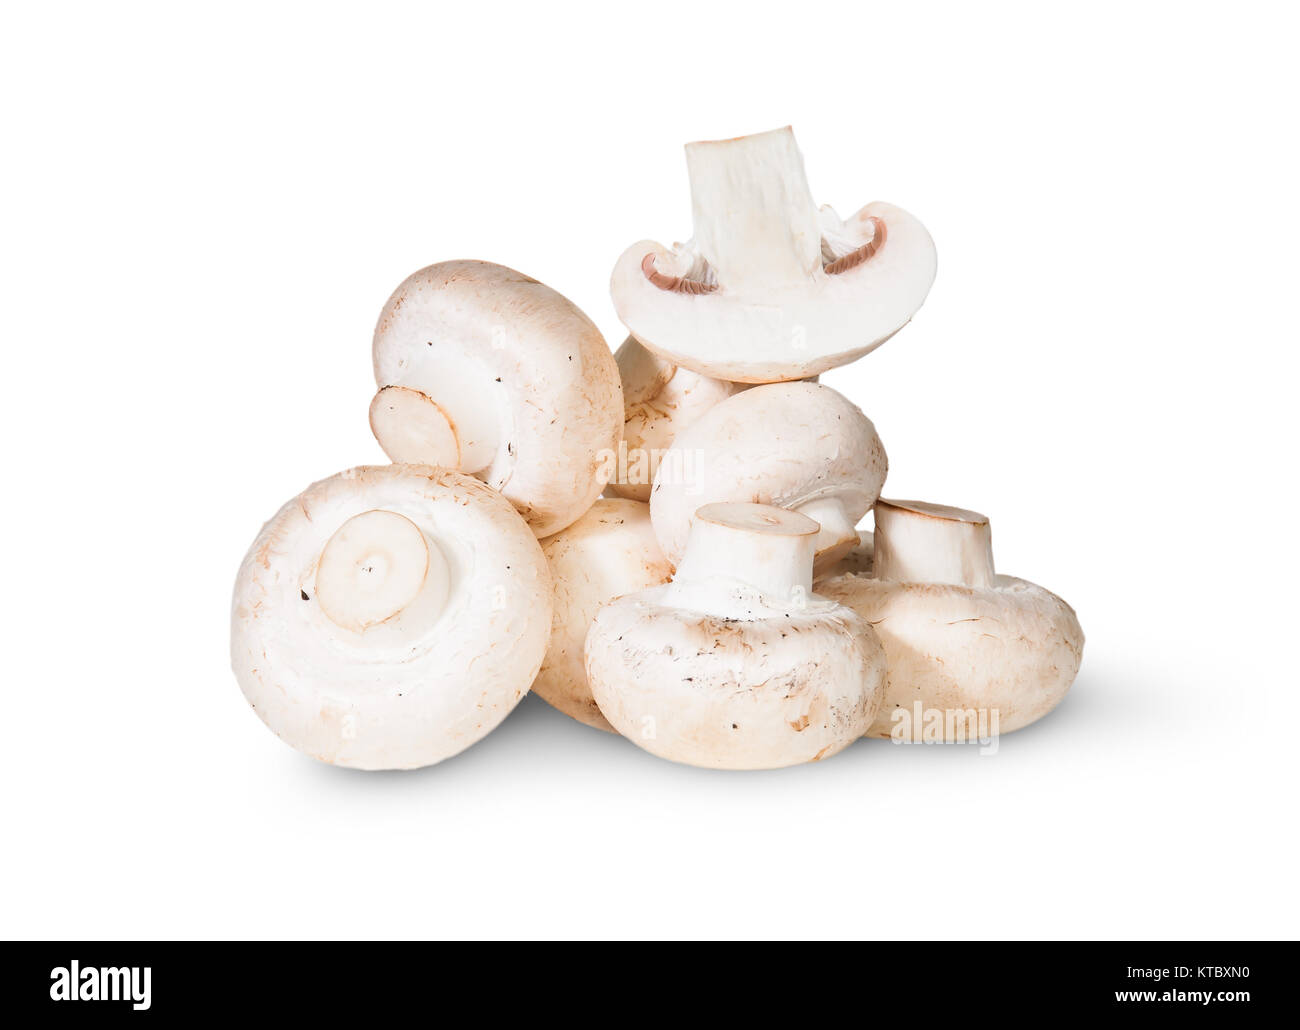 Pile Of Mushrooms And One Half Stock Photo